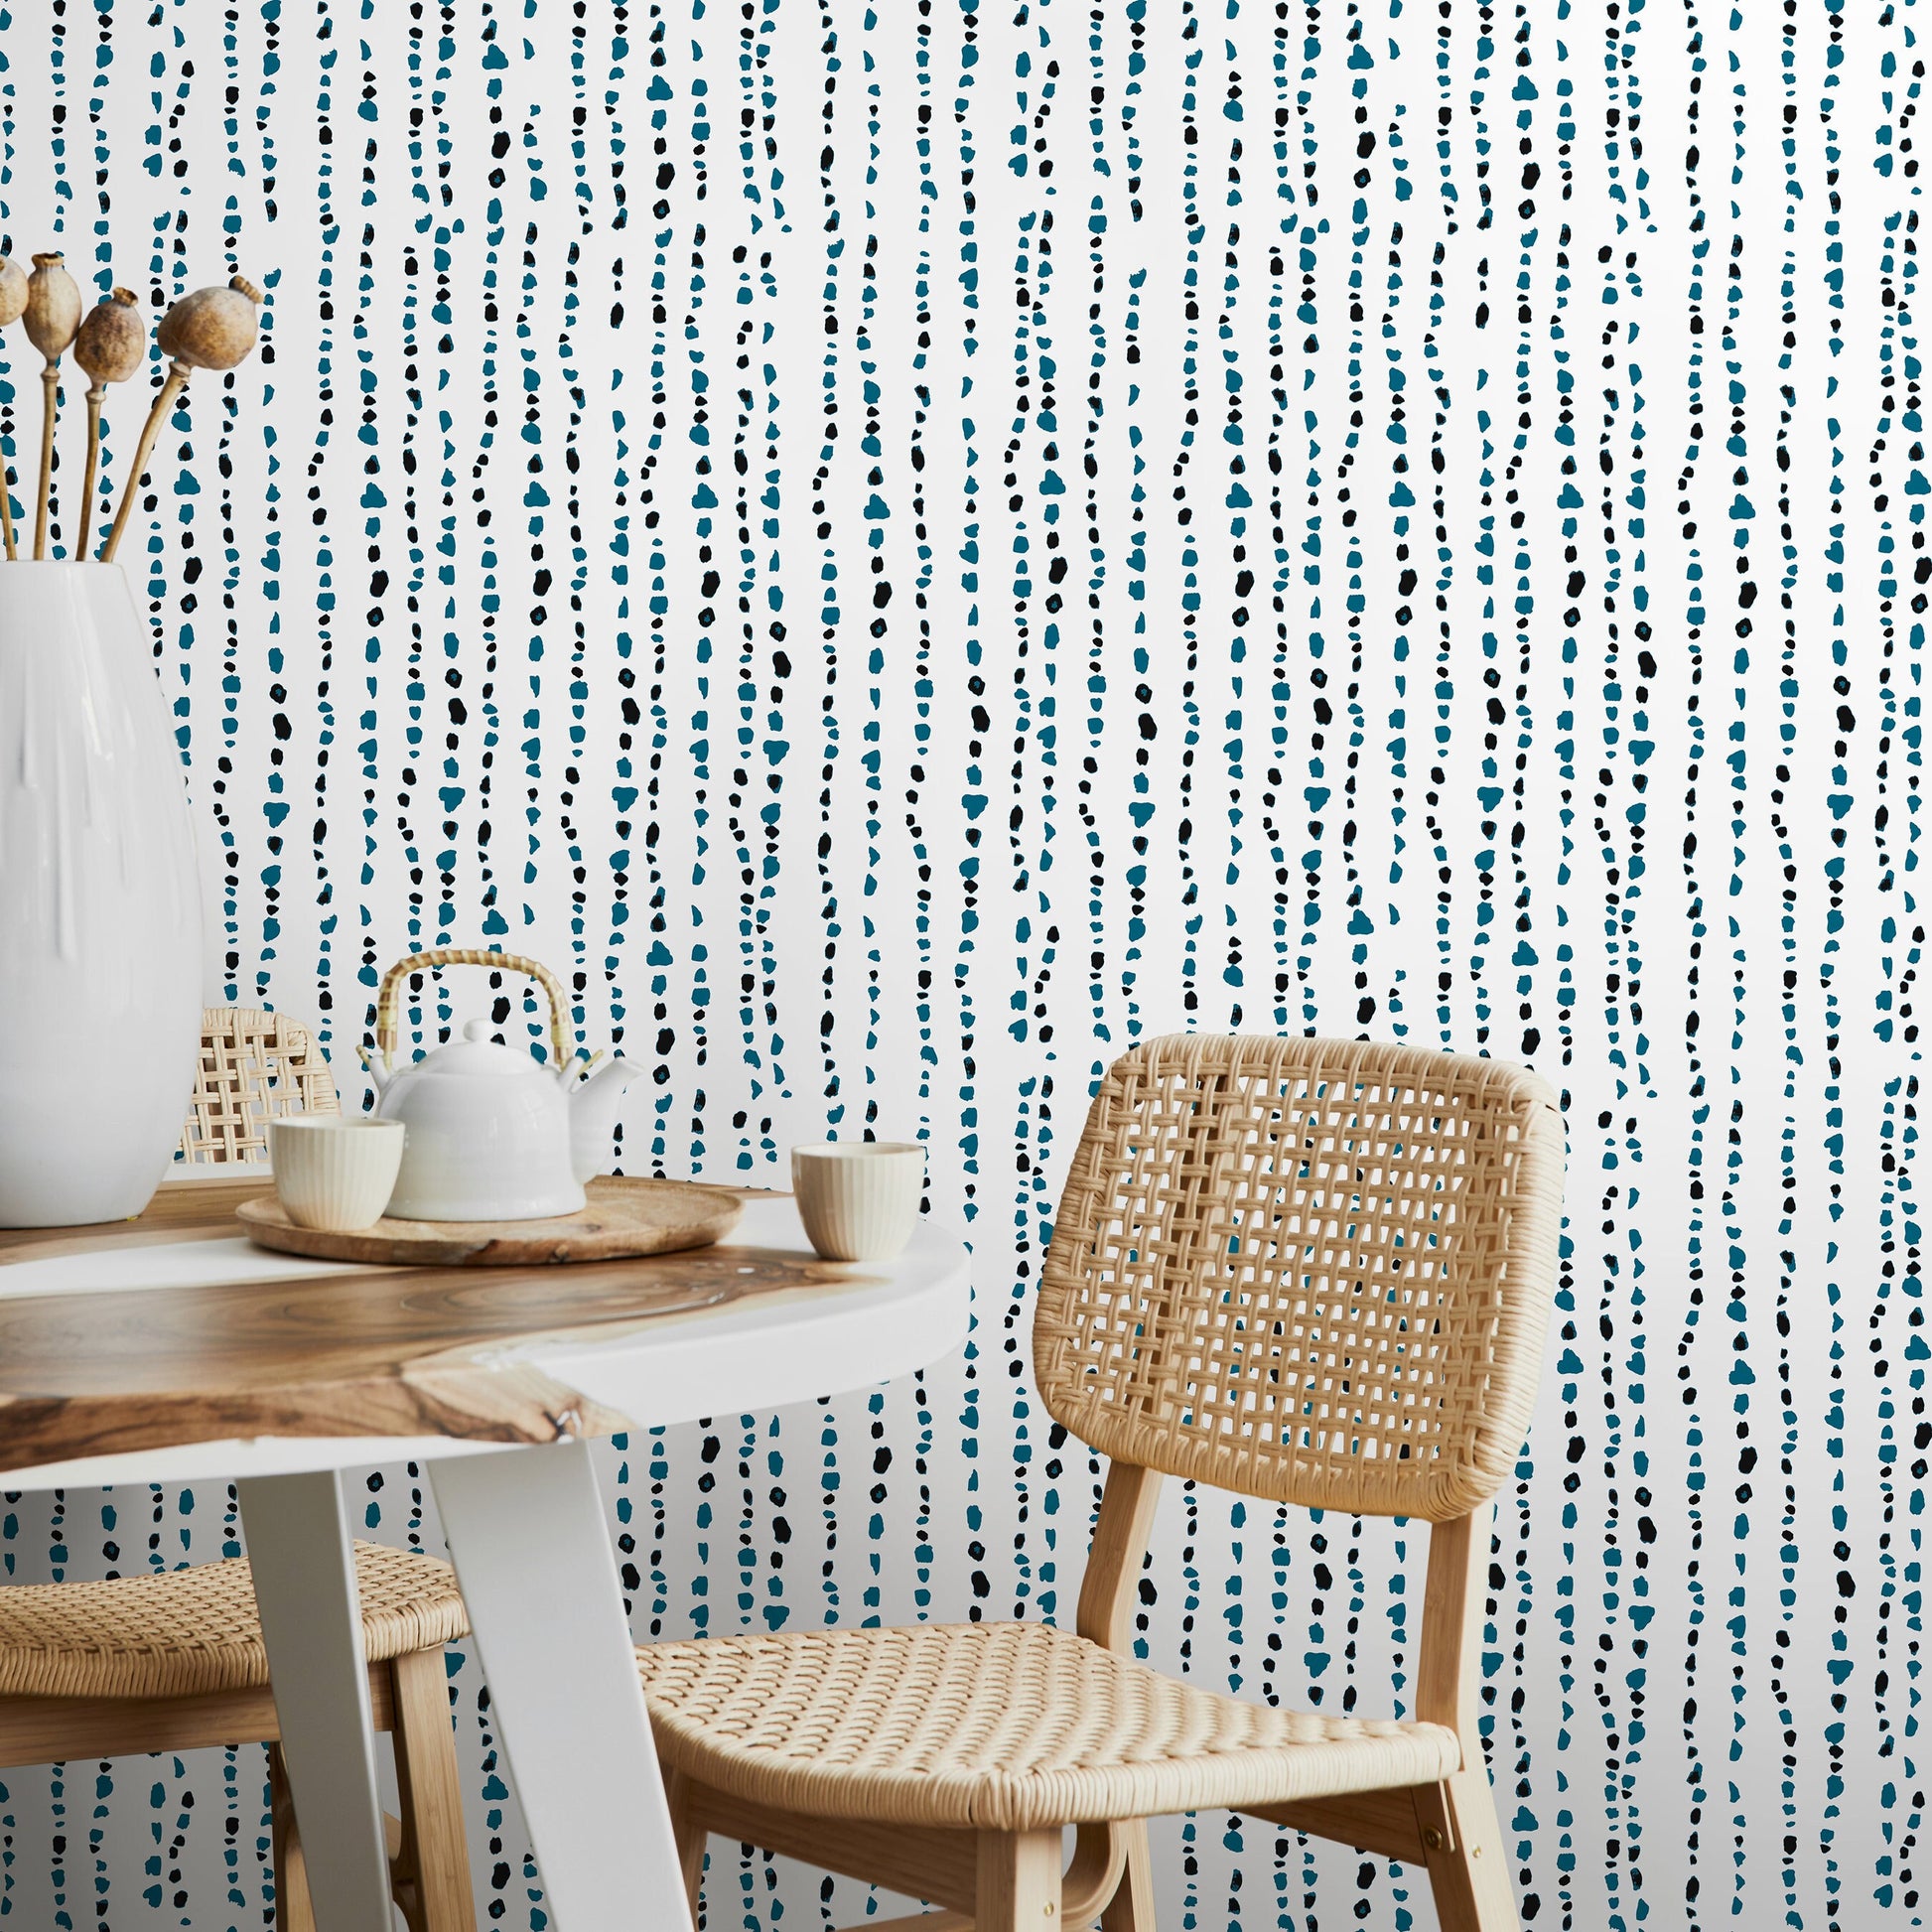 Wallpaper Peel and Stick Wallpaper Removable Wallpaper Home Decor Wall Art Wall Decor Room Decor / Blue Dots Simple Wallpaper - A150